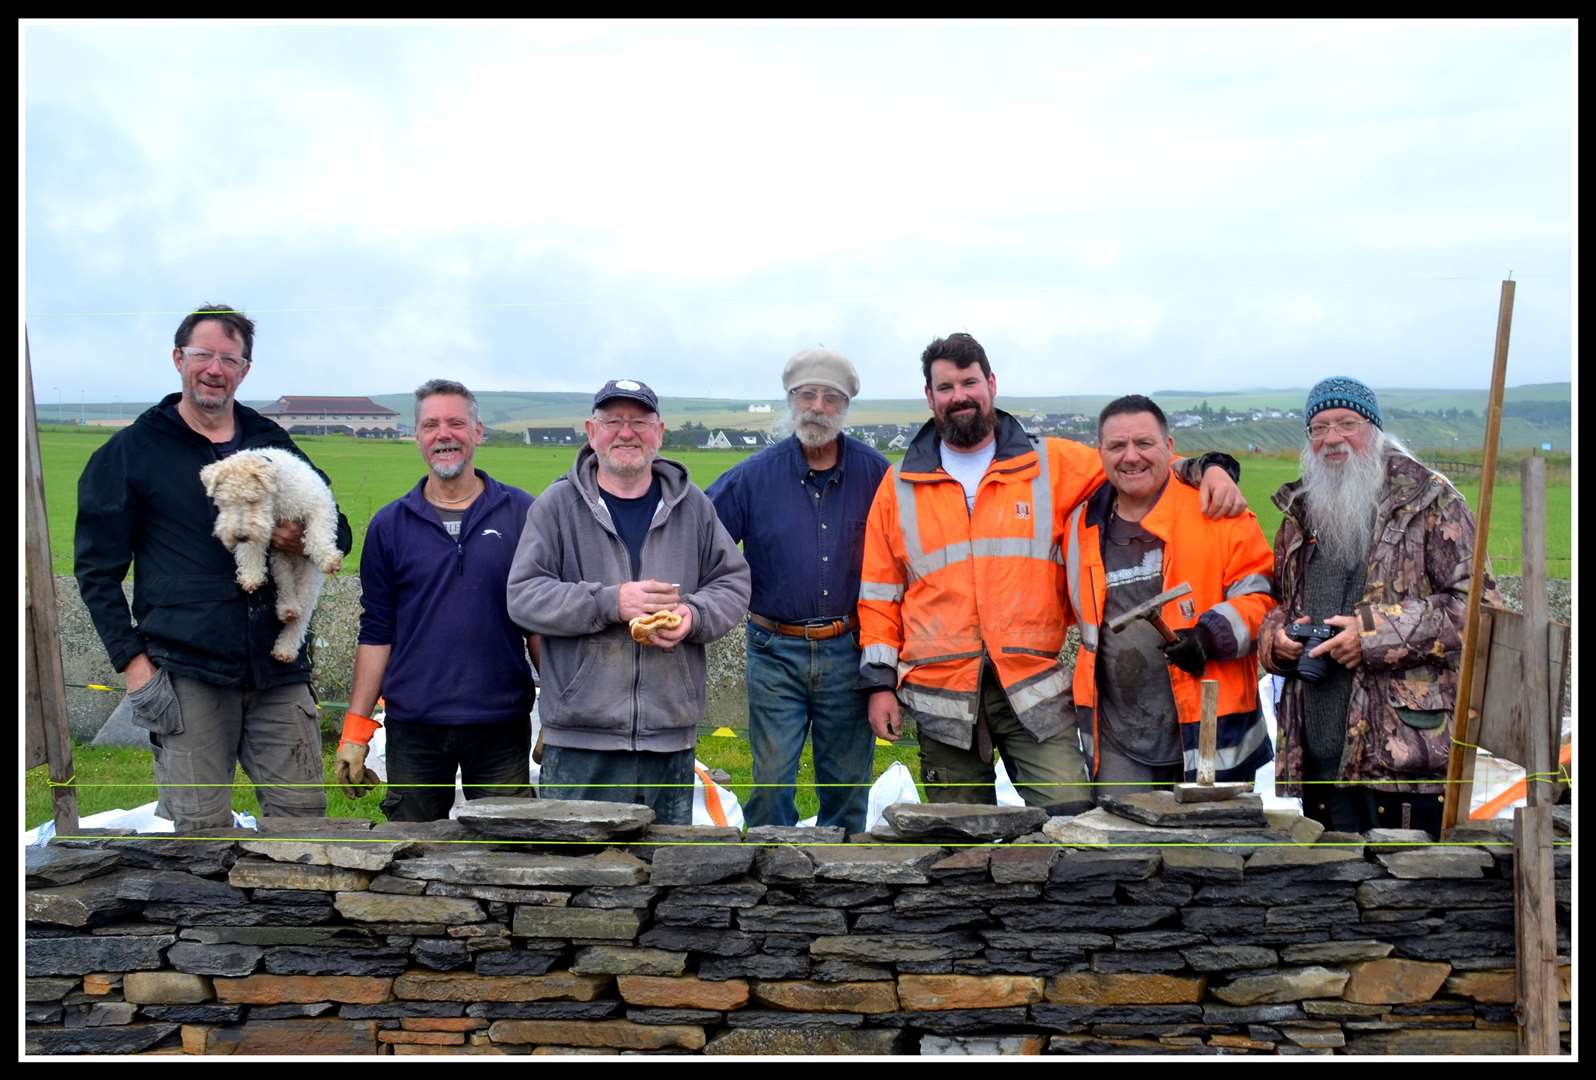 Organiser George Gunn (third from left) with some of the participants at the Stonefest event in Thurso.